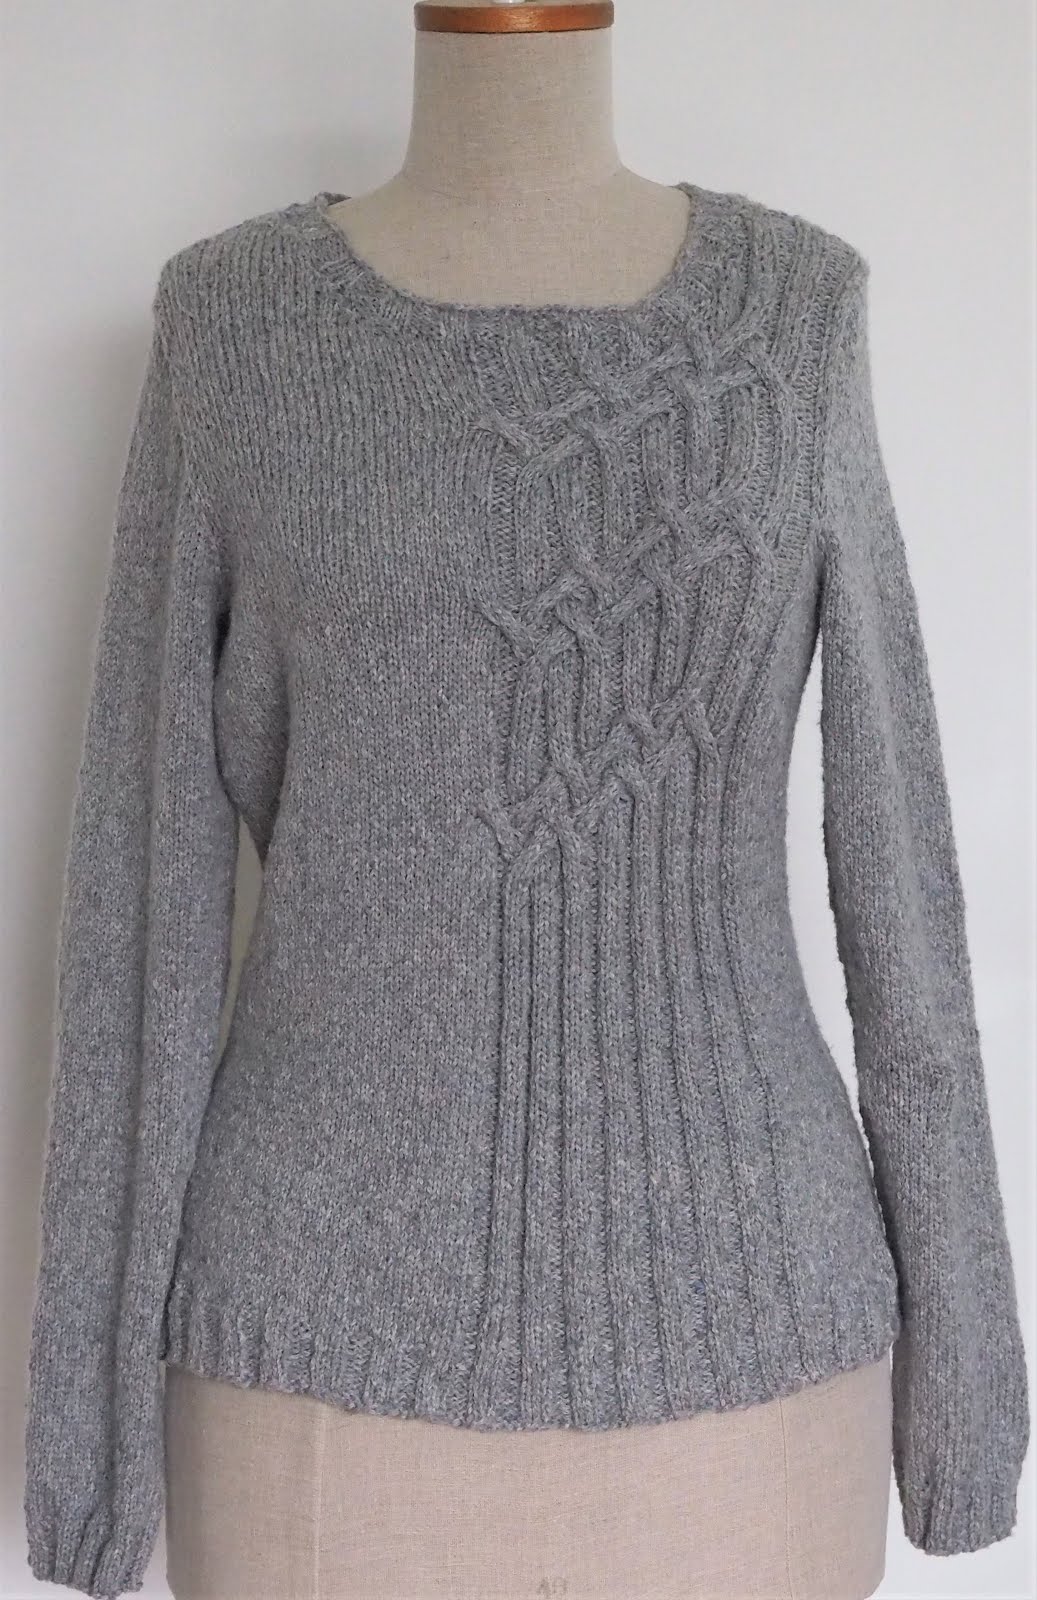 SIGRID - sewing, knitting: A sweater finished